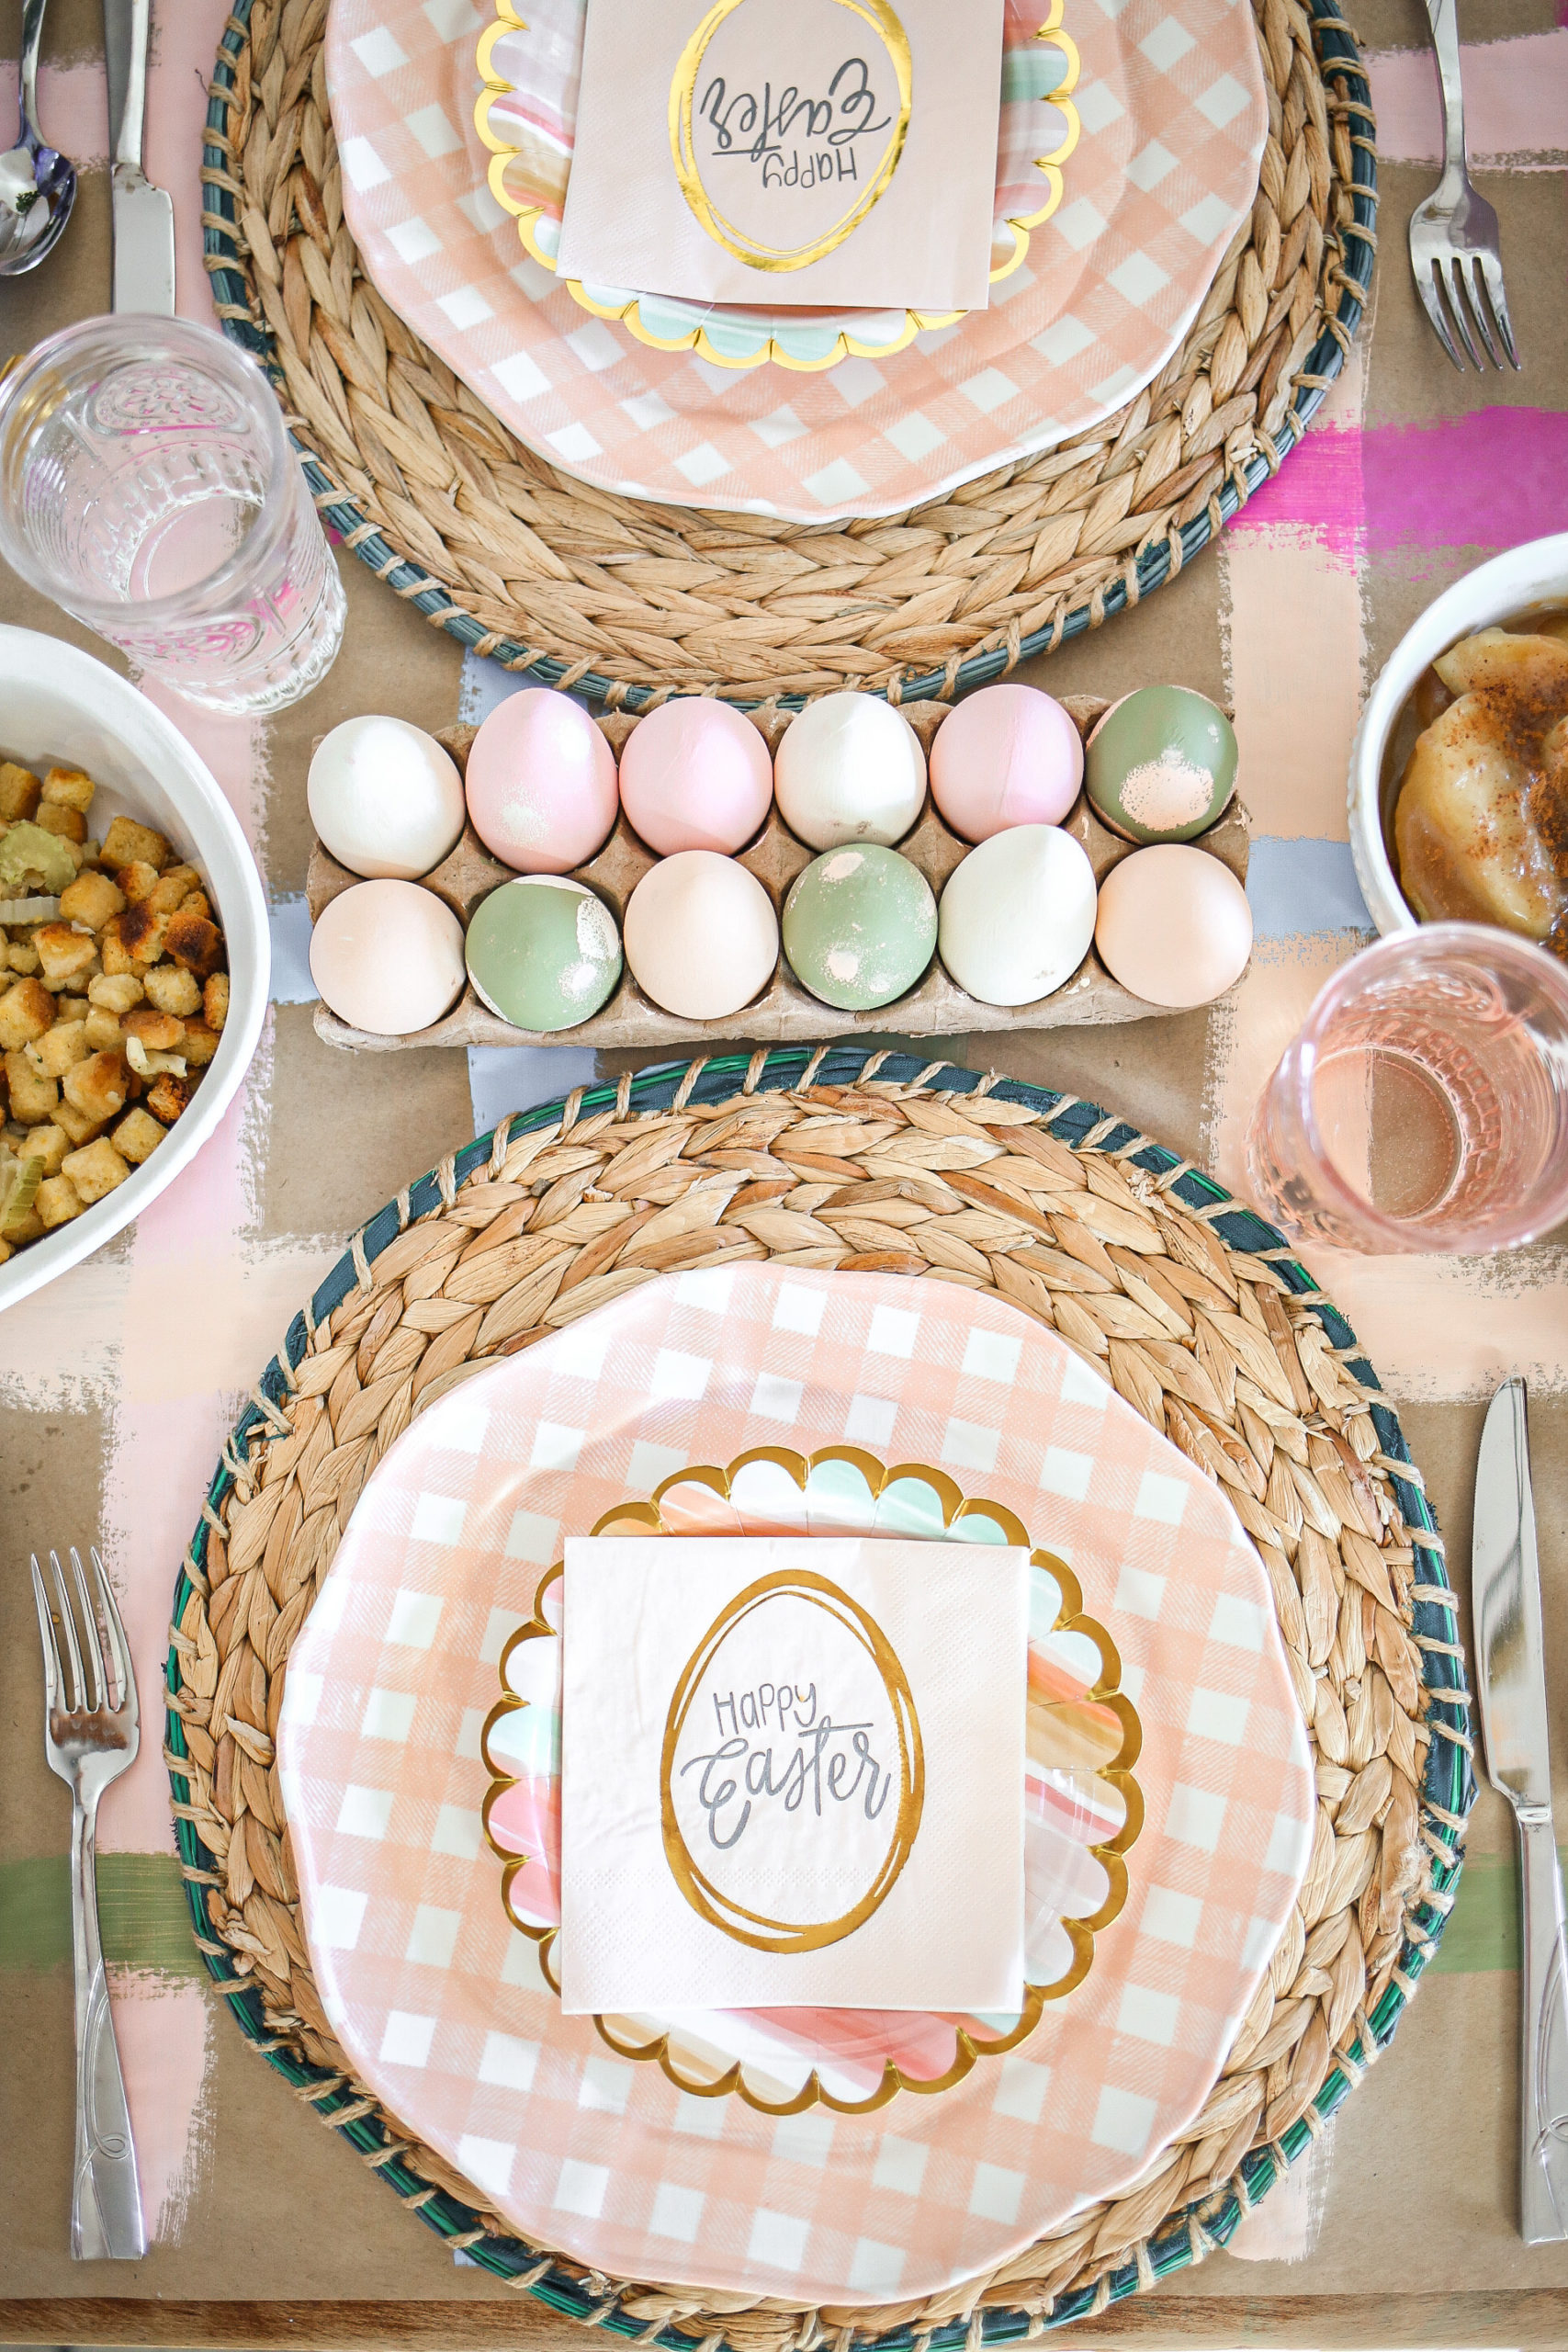 5 Tips to Host a Festive + Simple Easter Brunch at Home